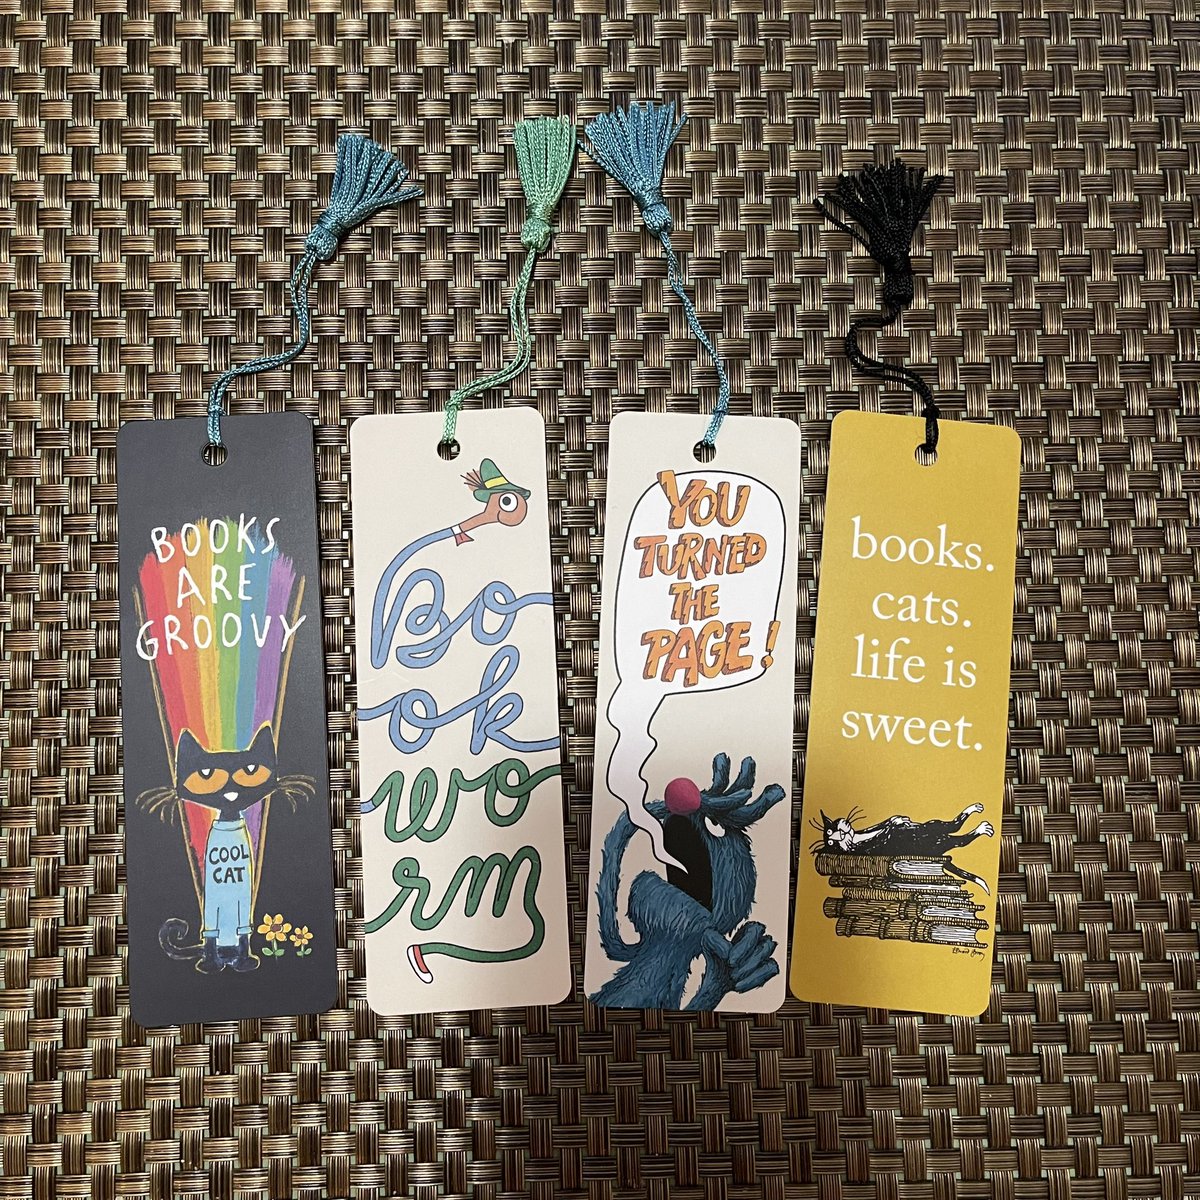 When @penguinrandom gives you a birthday coupon for @OutofPrintTees, you treat yourself to some cute new bookmarks! I love these so much! #bookmarks #booklover #bookaddict #wouldratherbereading #readingcommunity